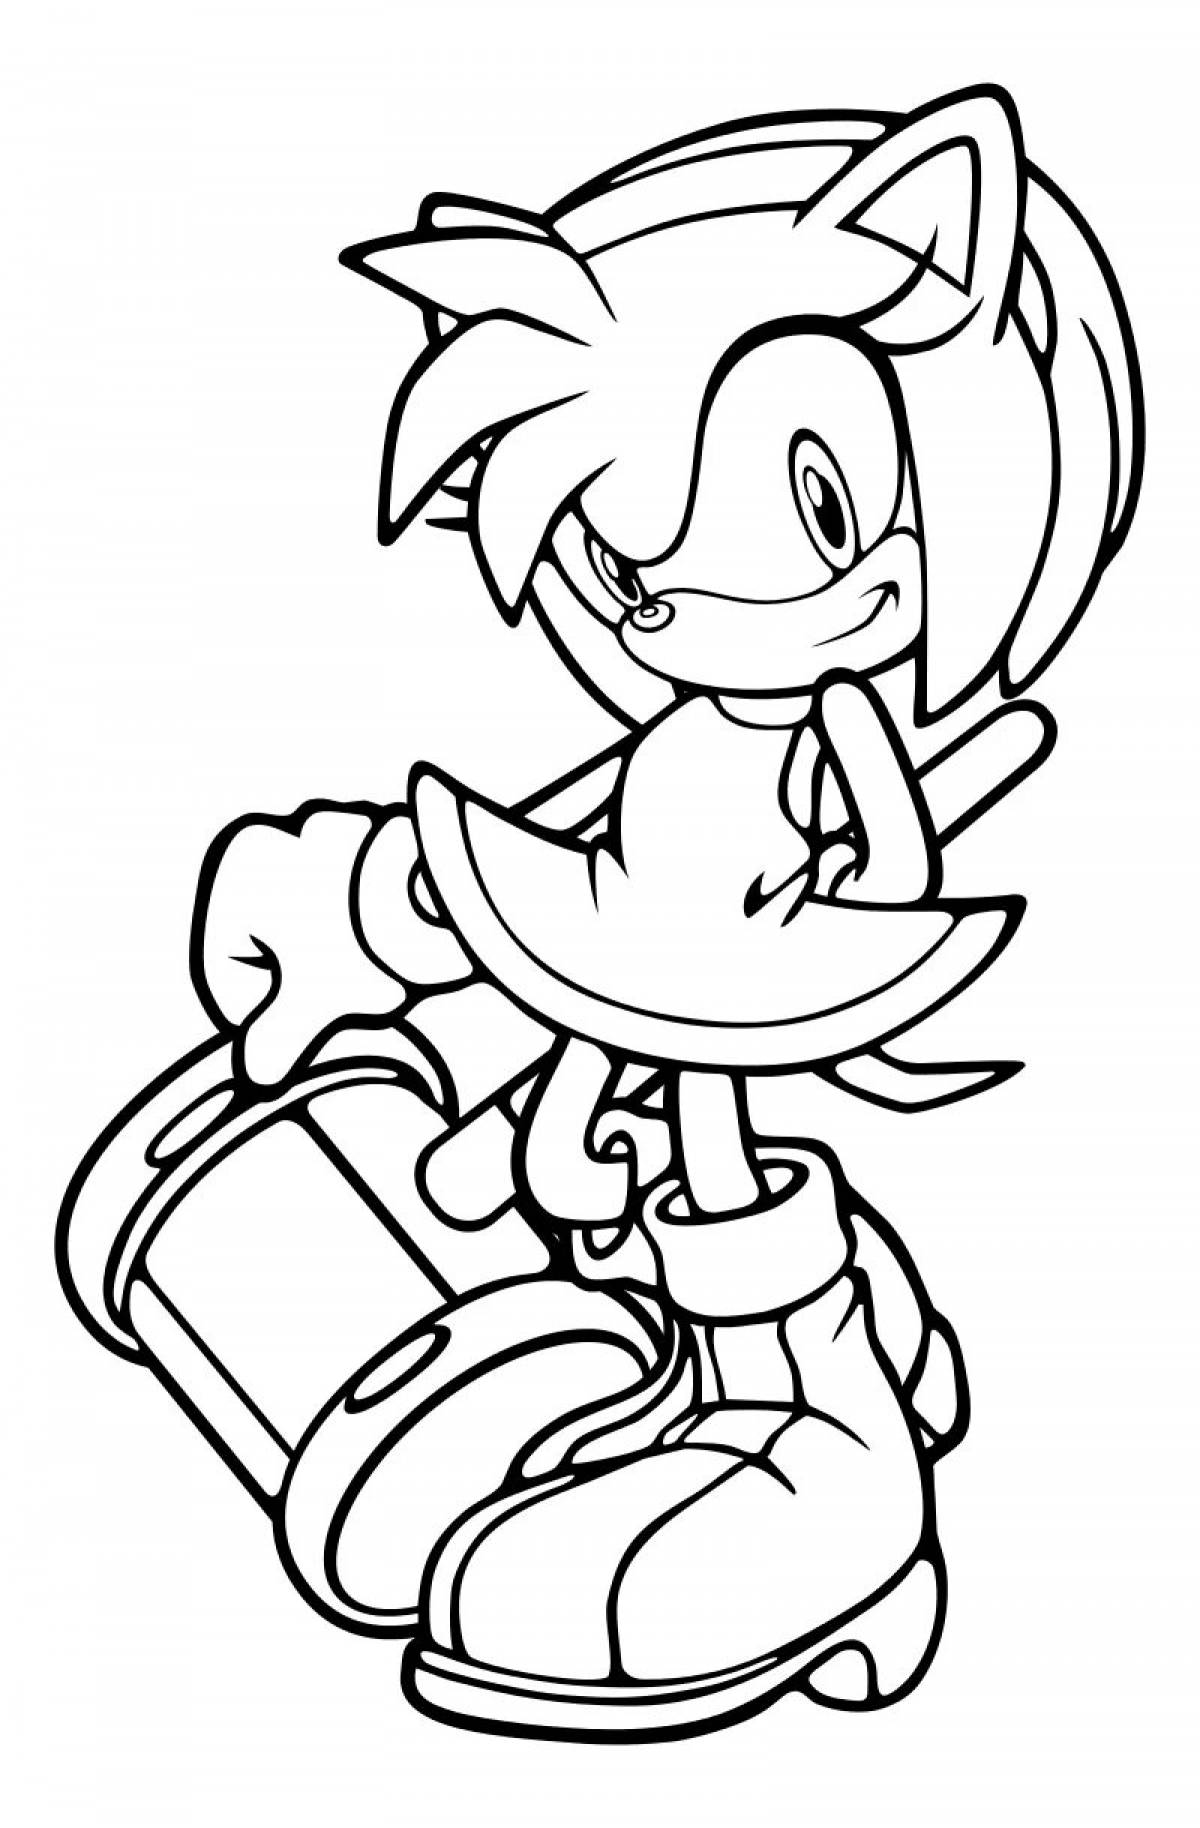 Emmy from sonic #1